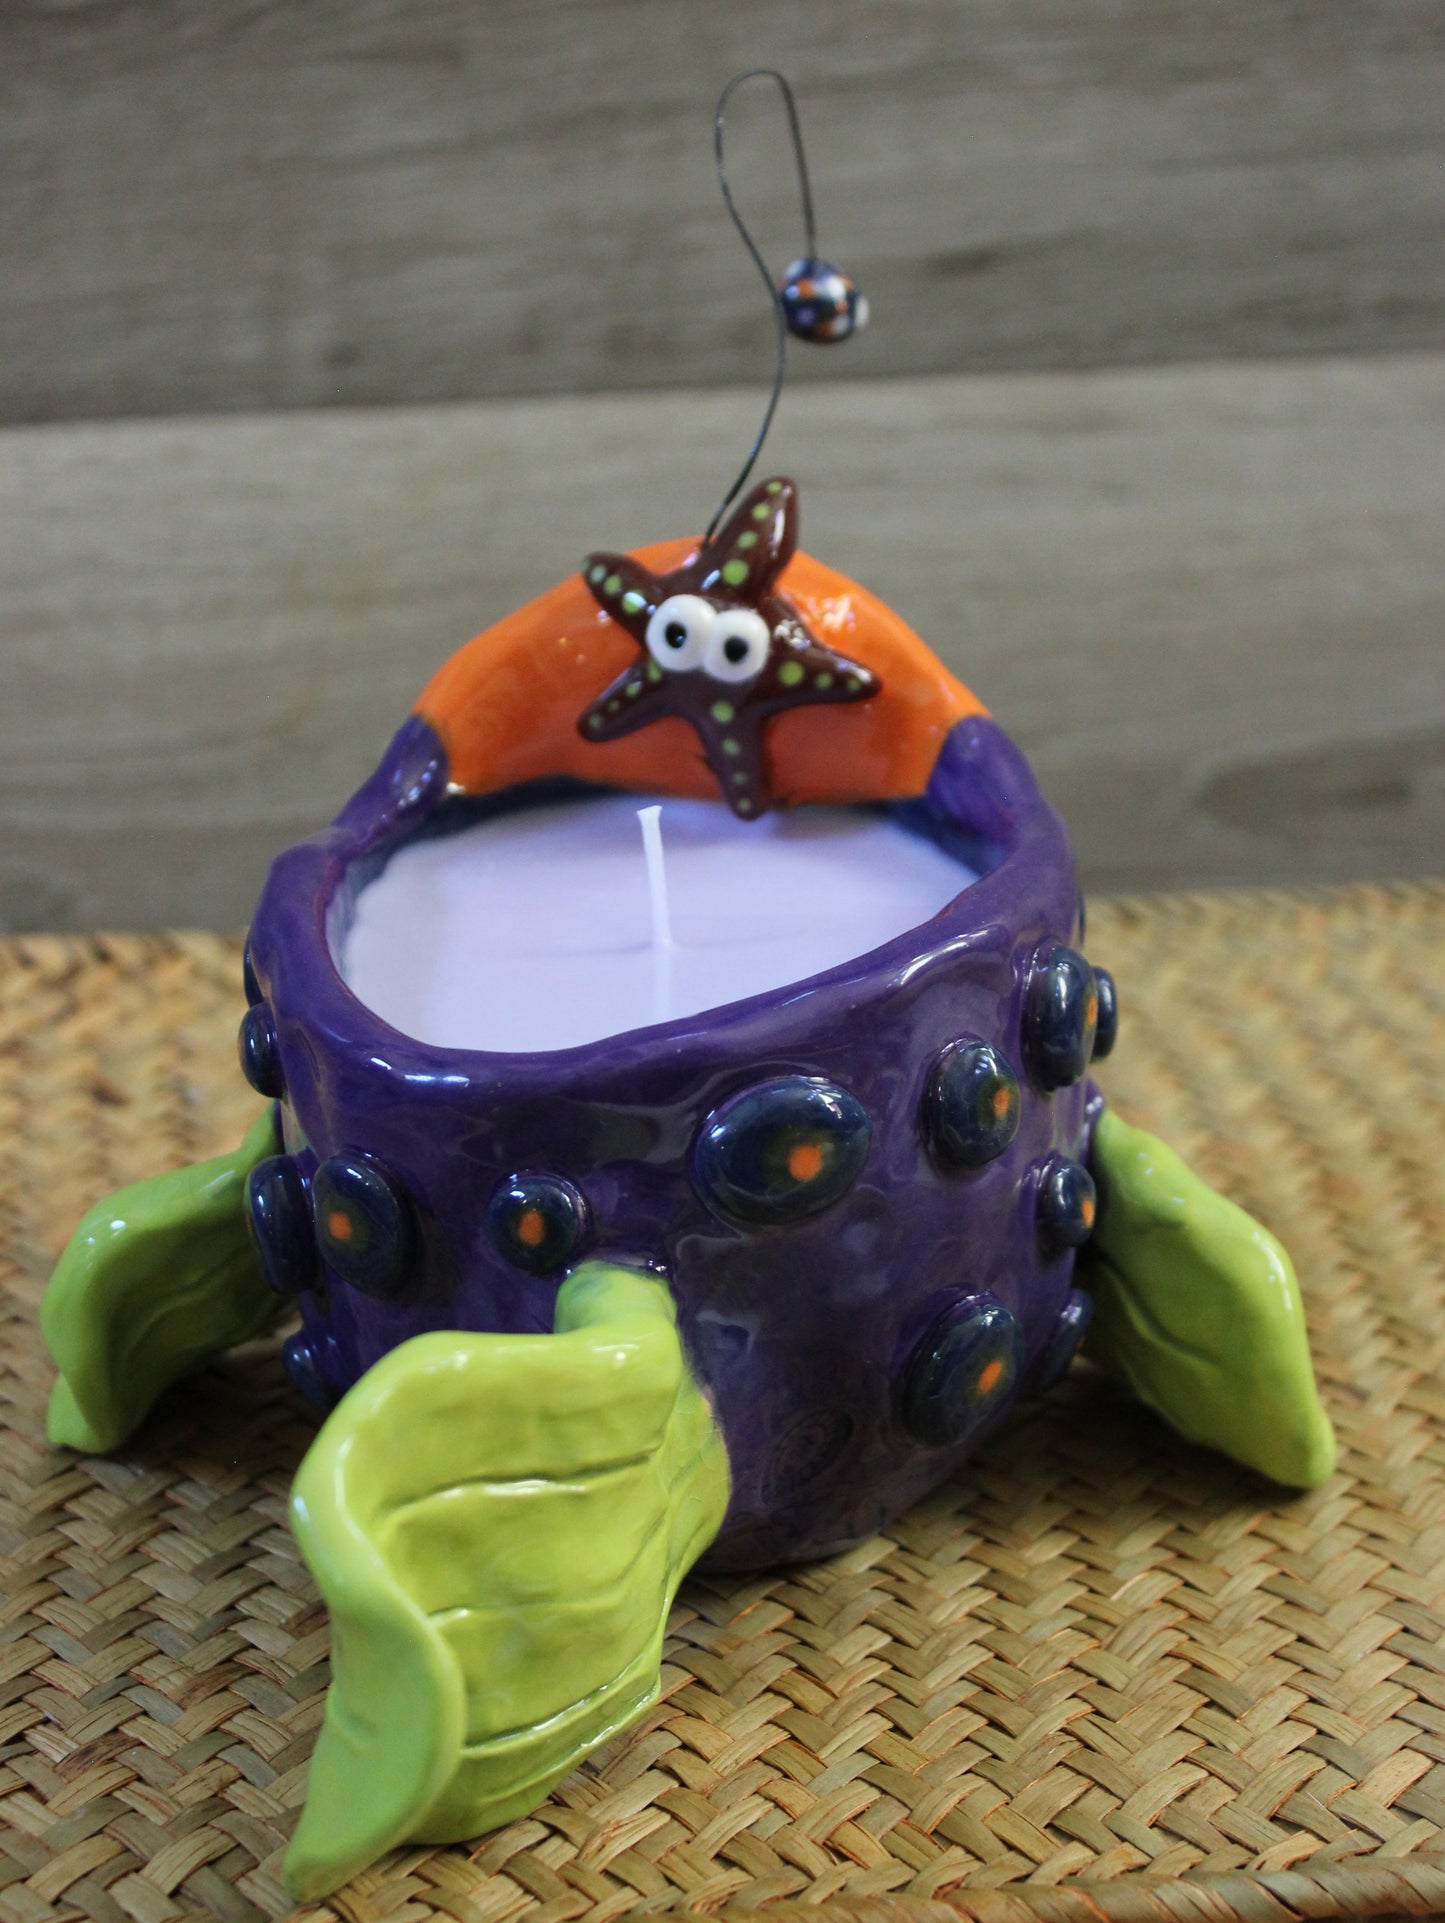 Ceramic Anglerfish Scented Candle and Knick Knack Tabletop Holder with Candle